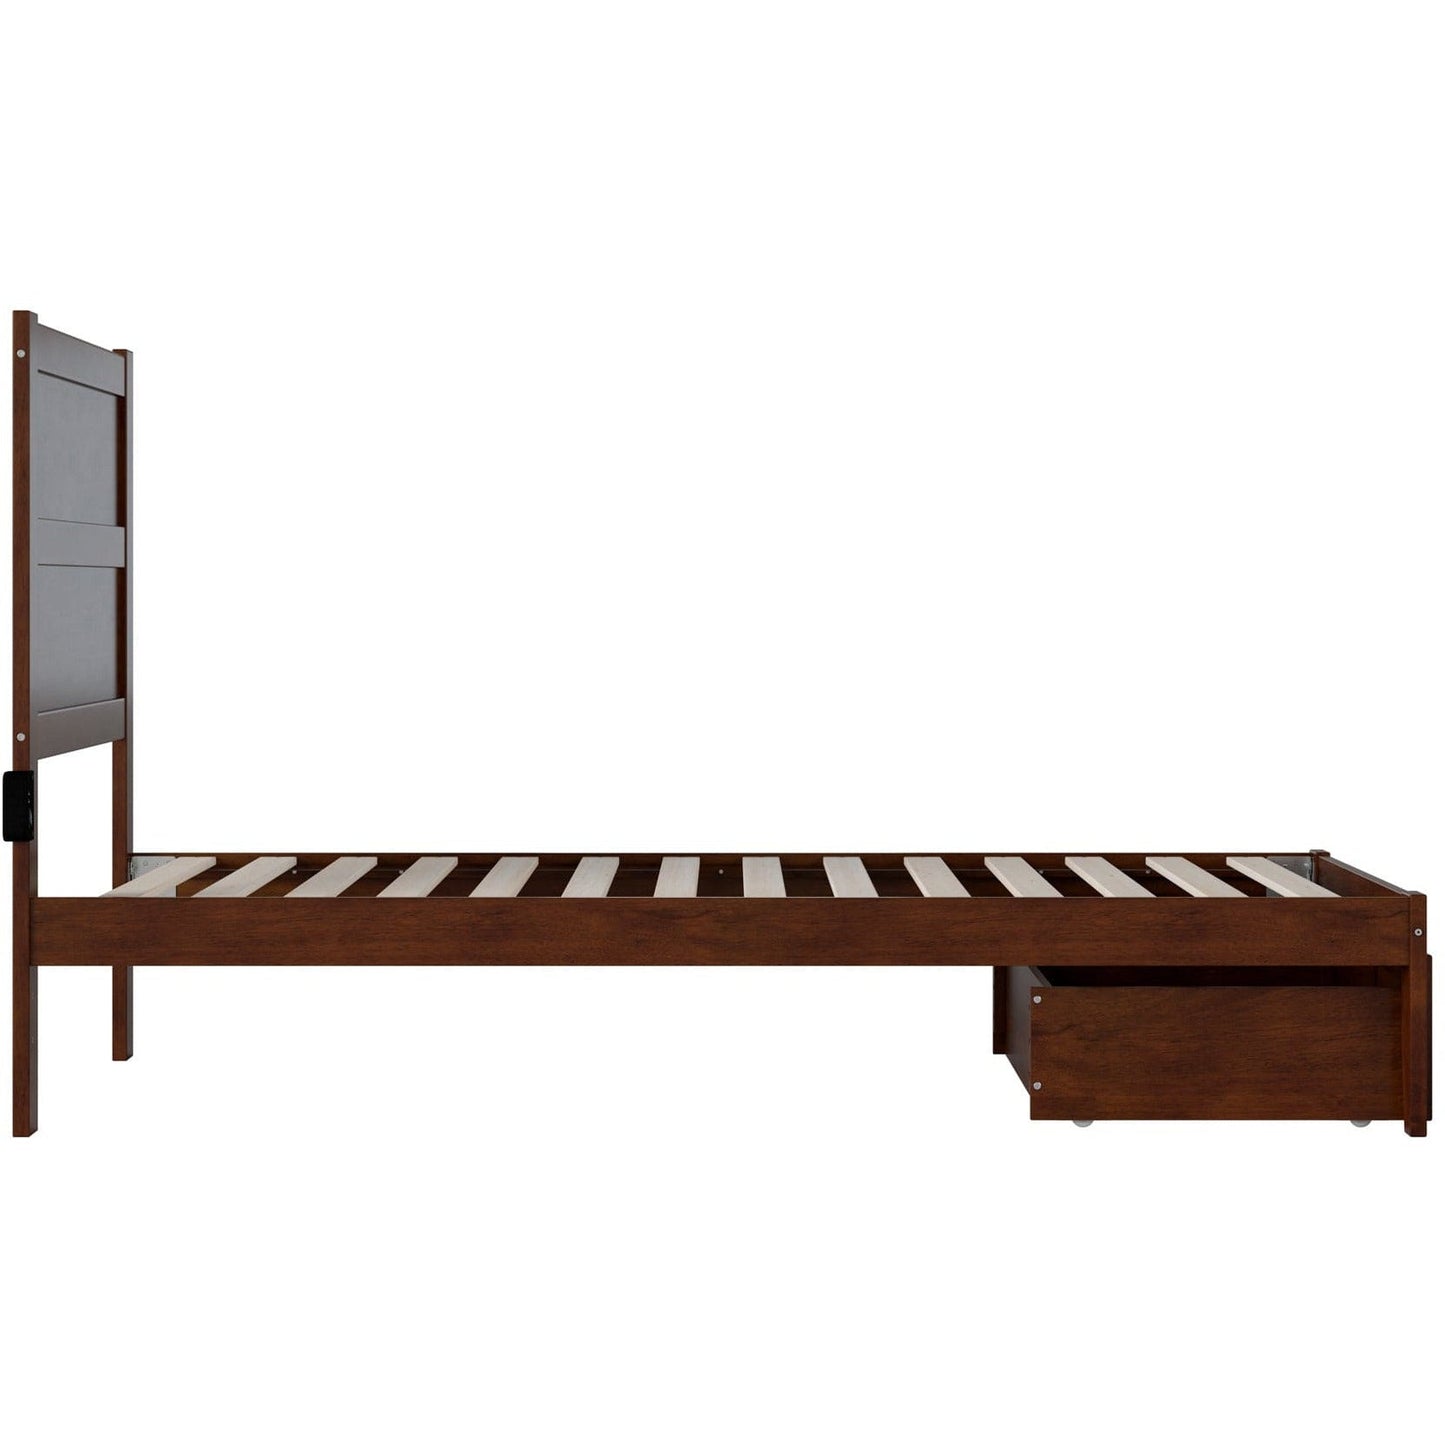 AFI Furnishings NoHo Twin Extra Long Bed with Foot Drawer in Walnut AG9112414